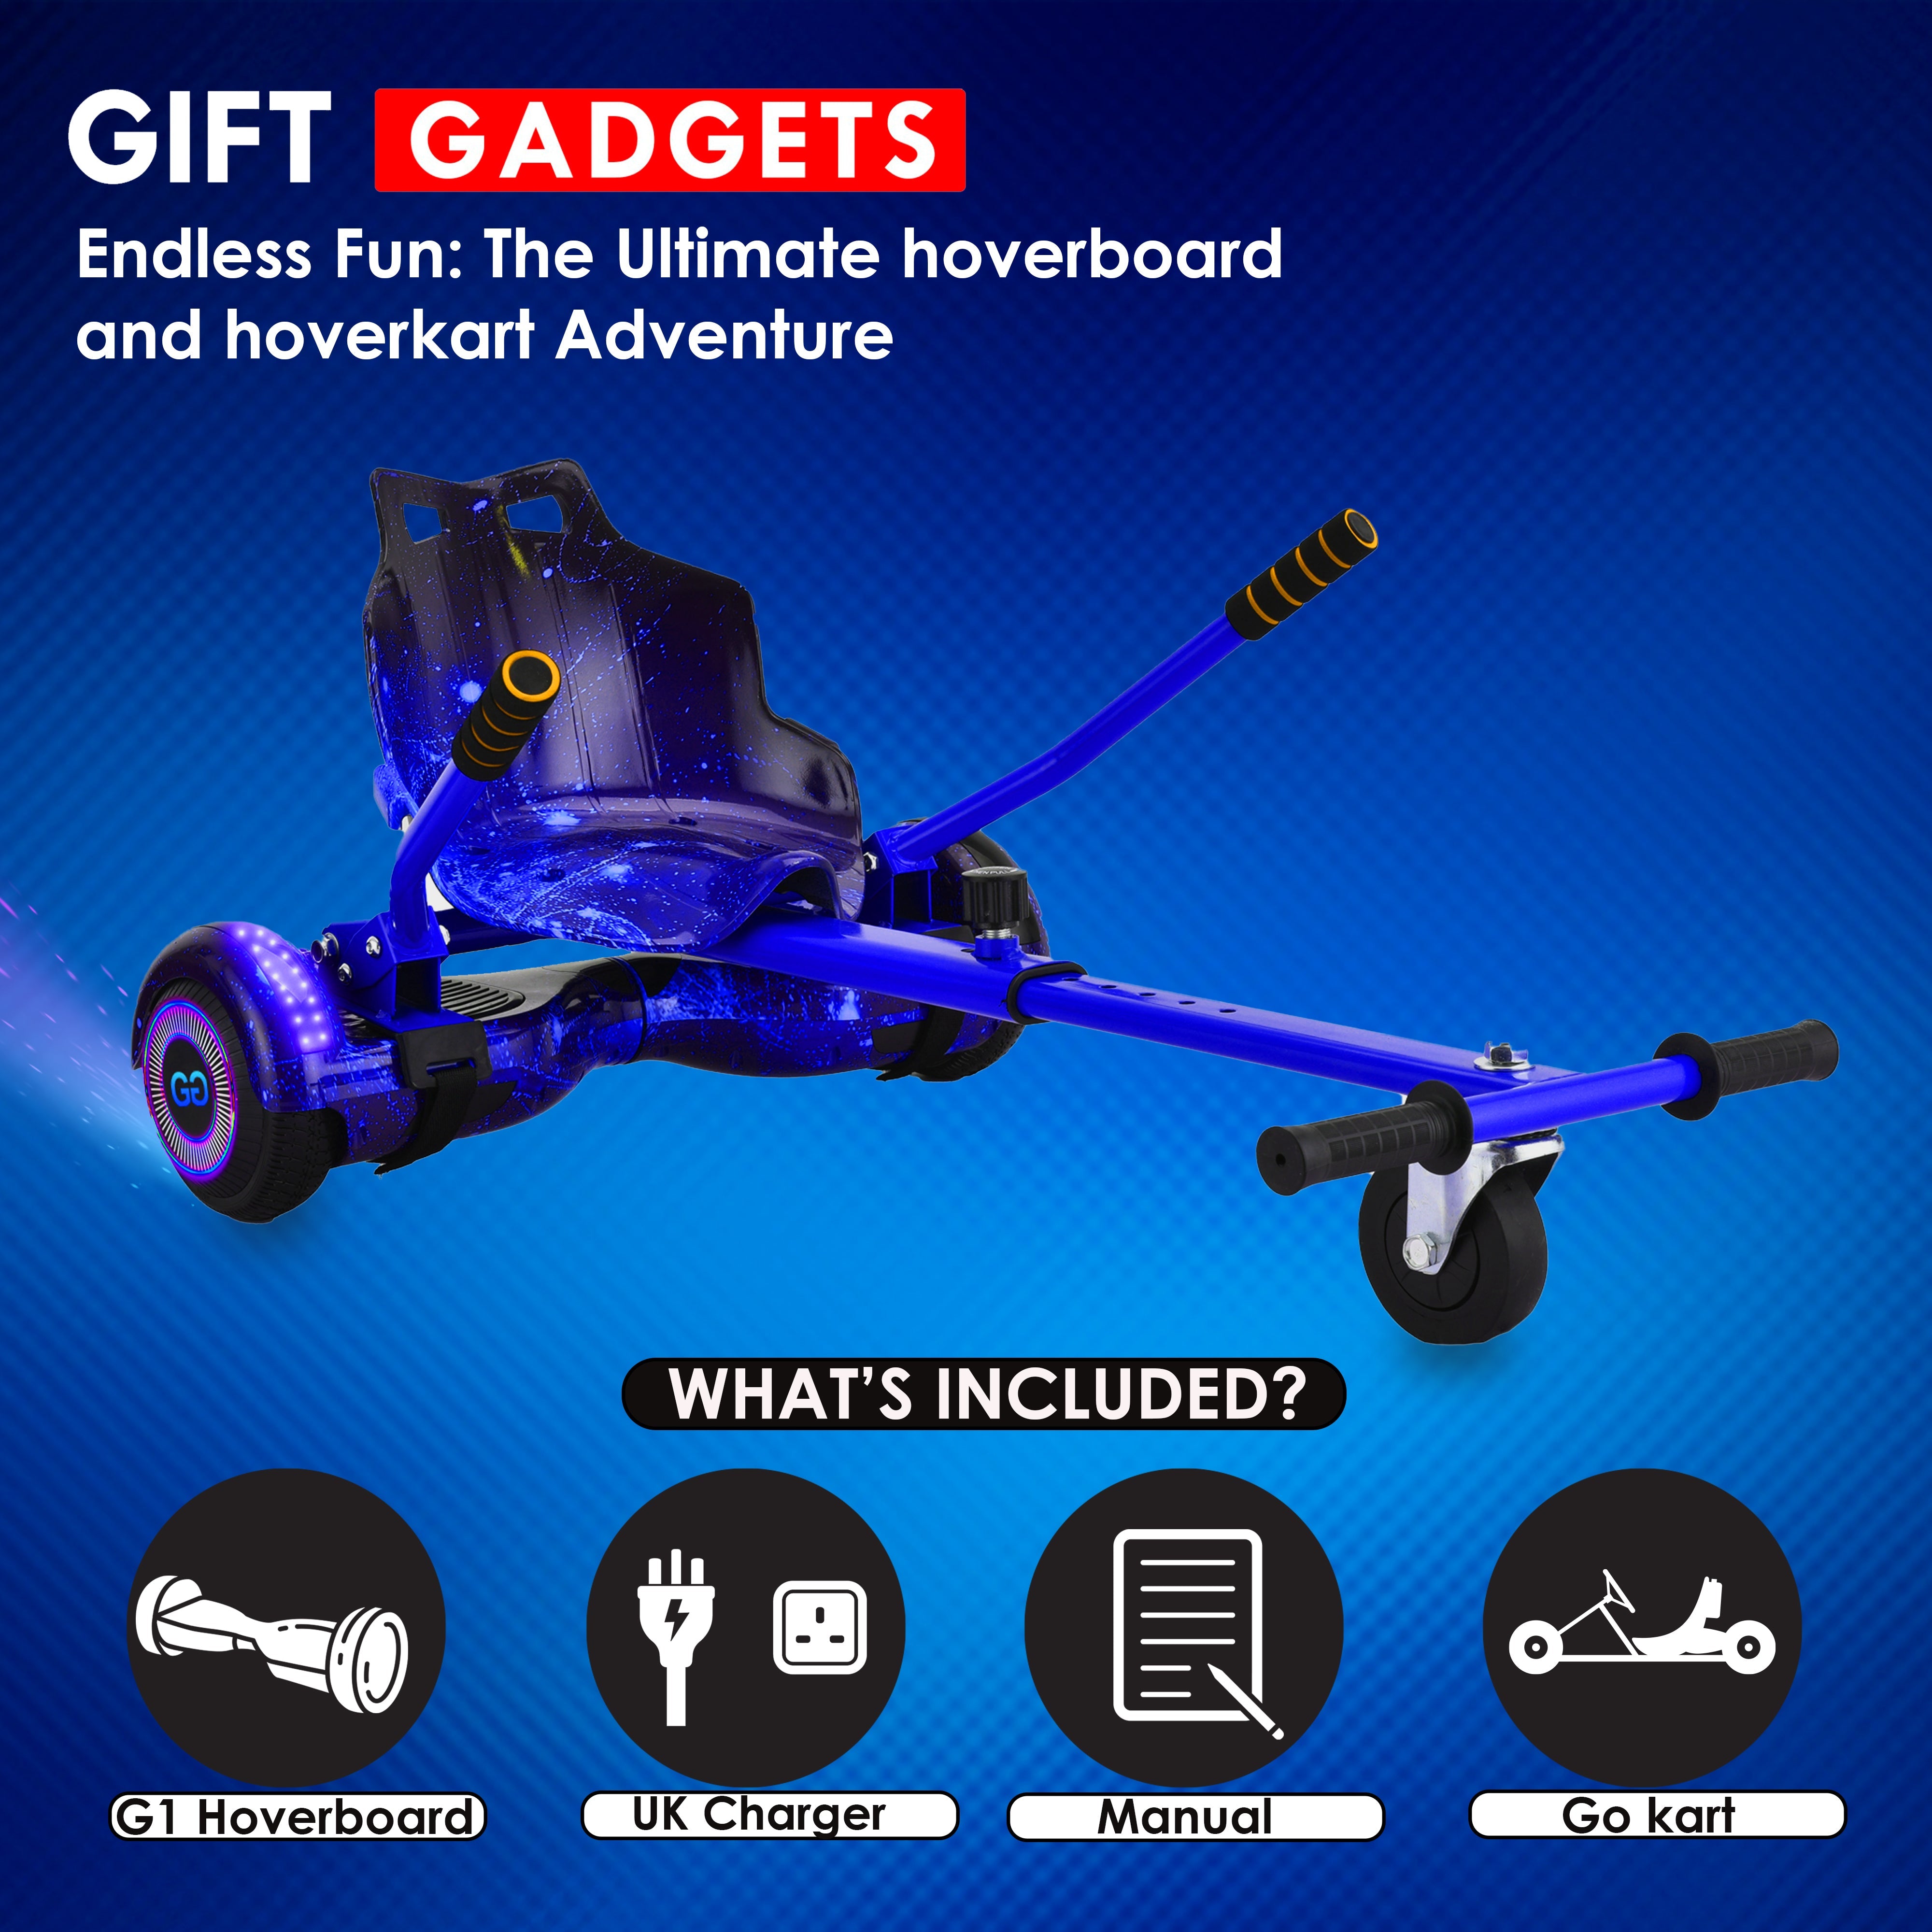 showcasing a blue Galaxy hoverboard converted into a hoverkart, displayed against a vivid blue background indicate included items: hoverboard, UK charger, manual, and go-kart kit.